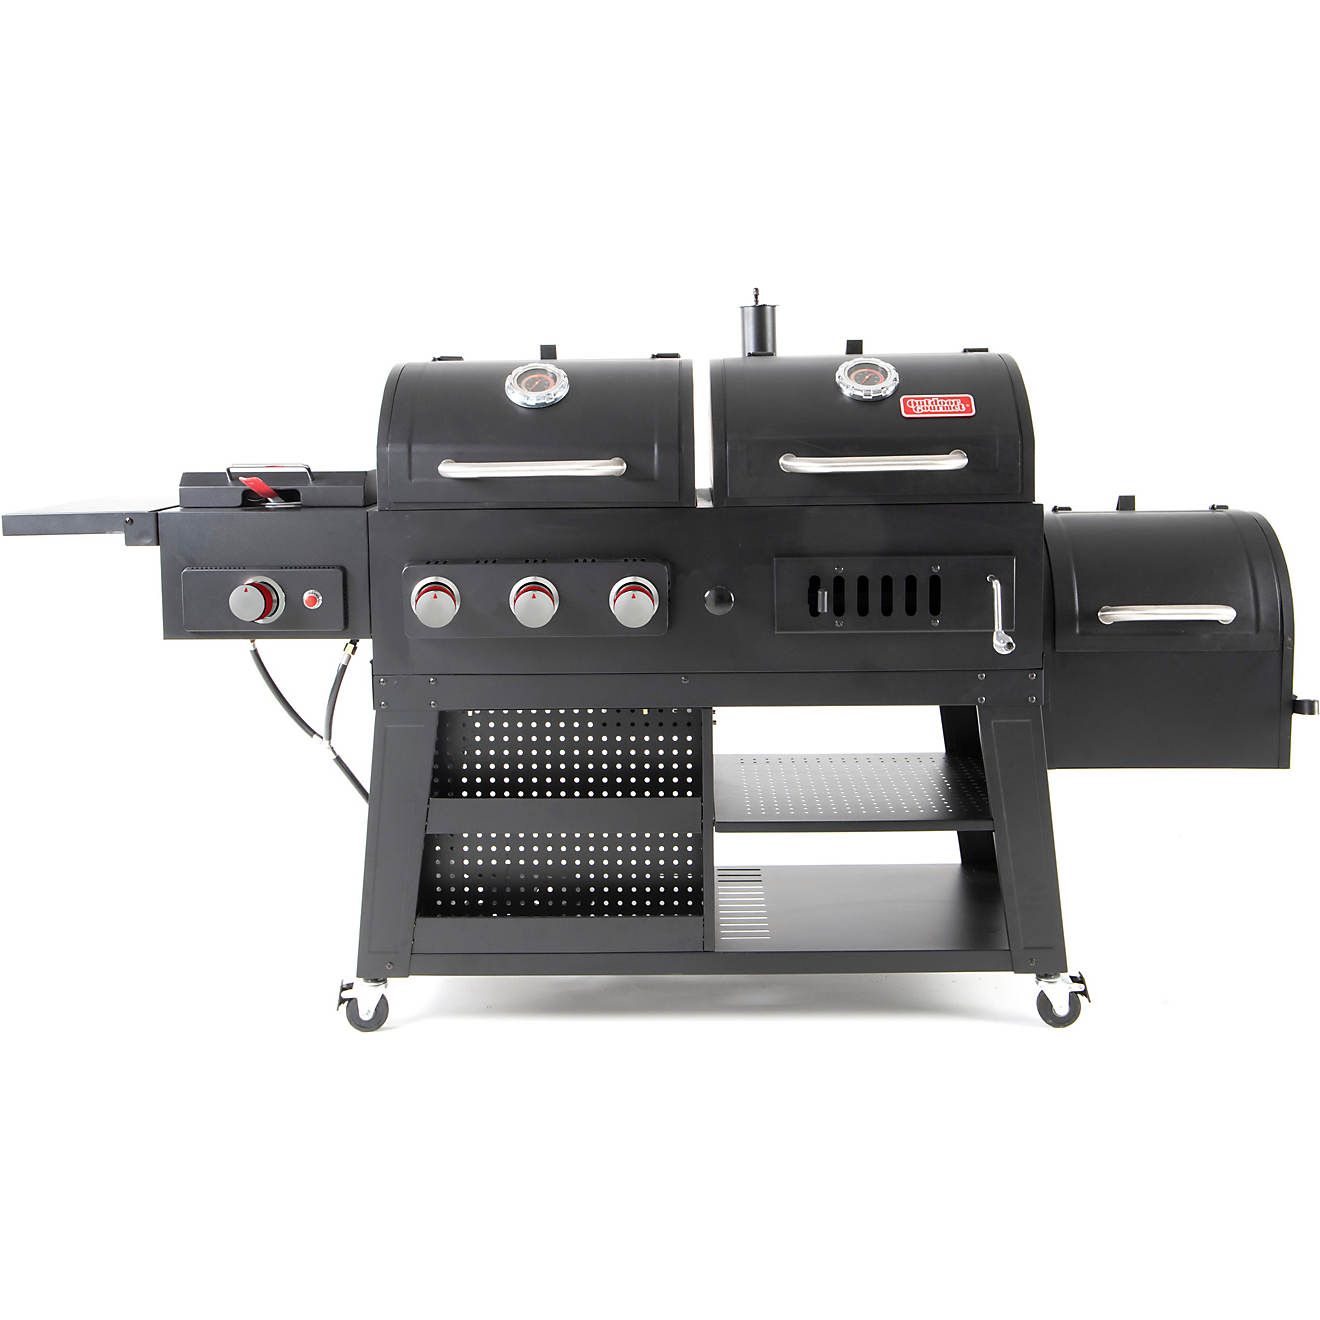 Outdoor Gourmet Fry/Grill/Smoke Combo Grill | Academy | Academy Sports + Outdoors